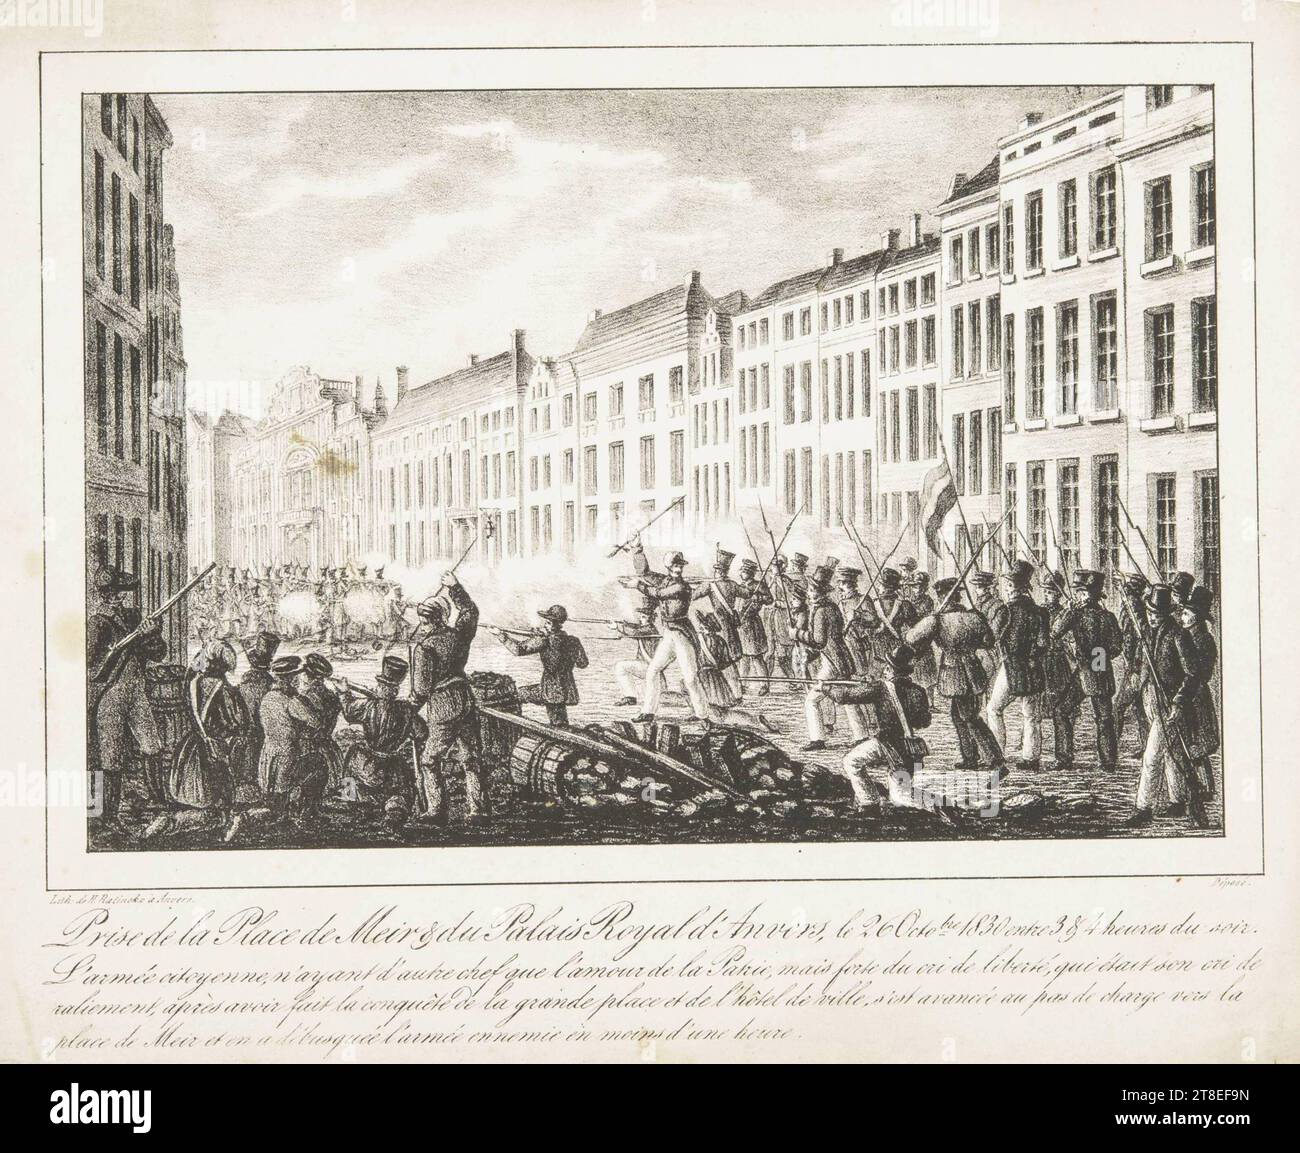 Belgian insurgents capture the Meirplaats and the royal palace in Antwerp from the Dutch, 1830. Antwerp. Belgian independence. Lith. by H. Ratinckx in Antwerp. Capture of the Meirplaats and the Royal Palace in Antwerp, October 26, 1830 between 3 & 4 o'clock in the evening. The citizen's army, having no other leader than the love of the Fatherland, but strong of the cry of freedom, which was its rallying cry, after having made the conquest of the big square and the city hall Stock Photo